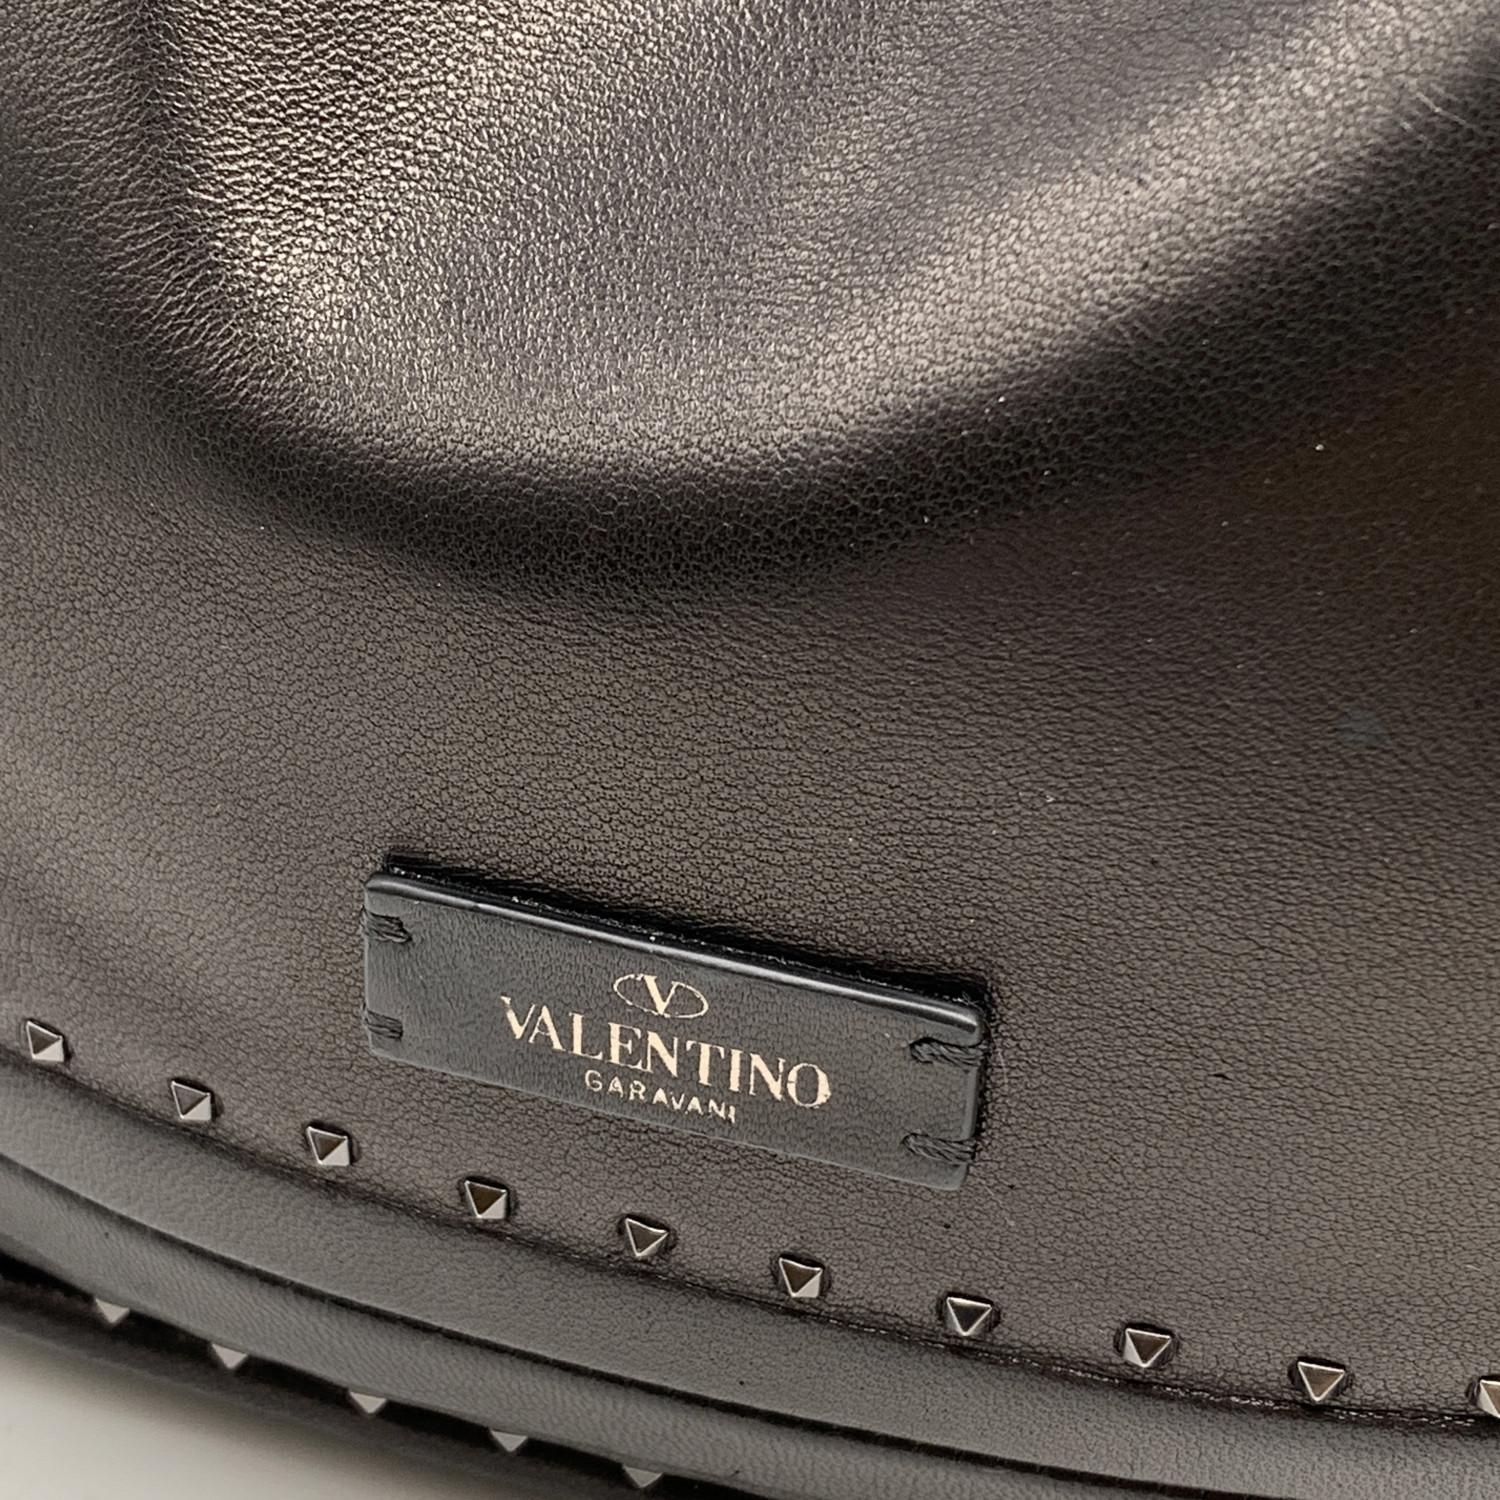 This beautiful Bag will come with a Certificate of Authenticity provided by Entrupy. The certificate will be provided at no further cost.

VALENTINO GARAVANI slouchy tote bag in black leather. Small gunmetal pyramid studs detailing. Magnetic button